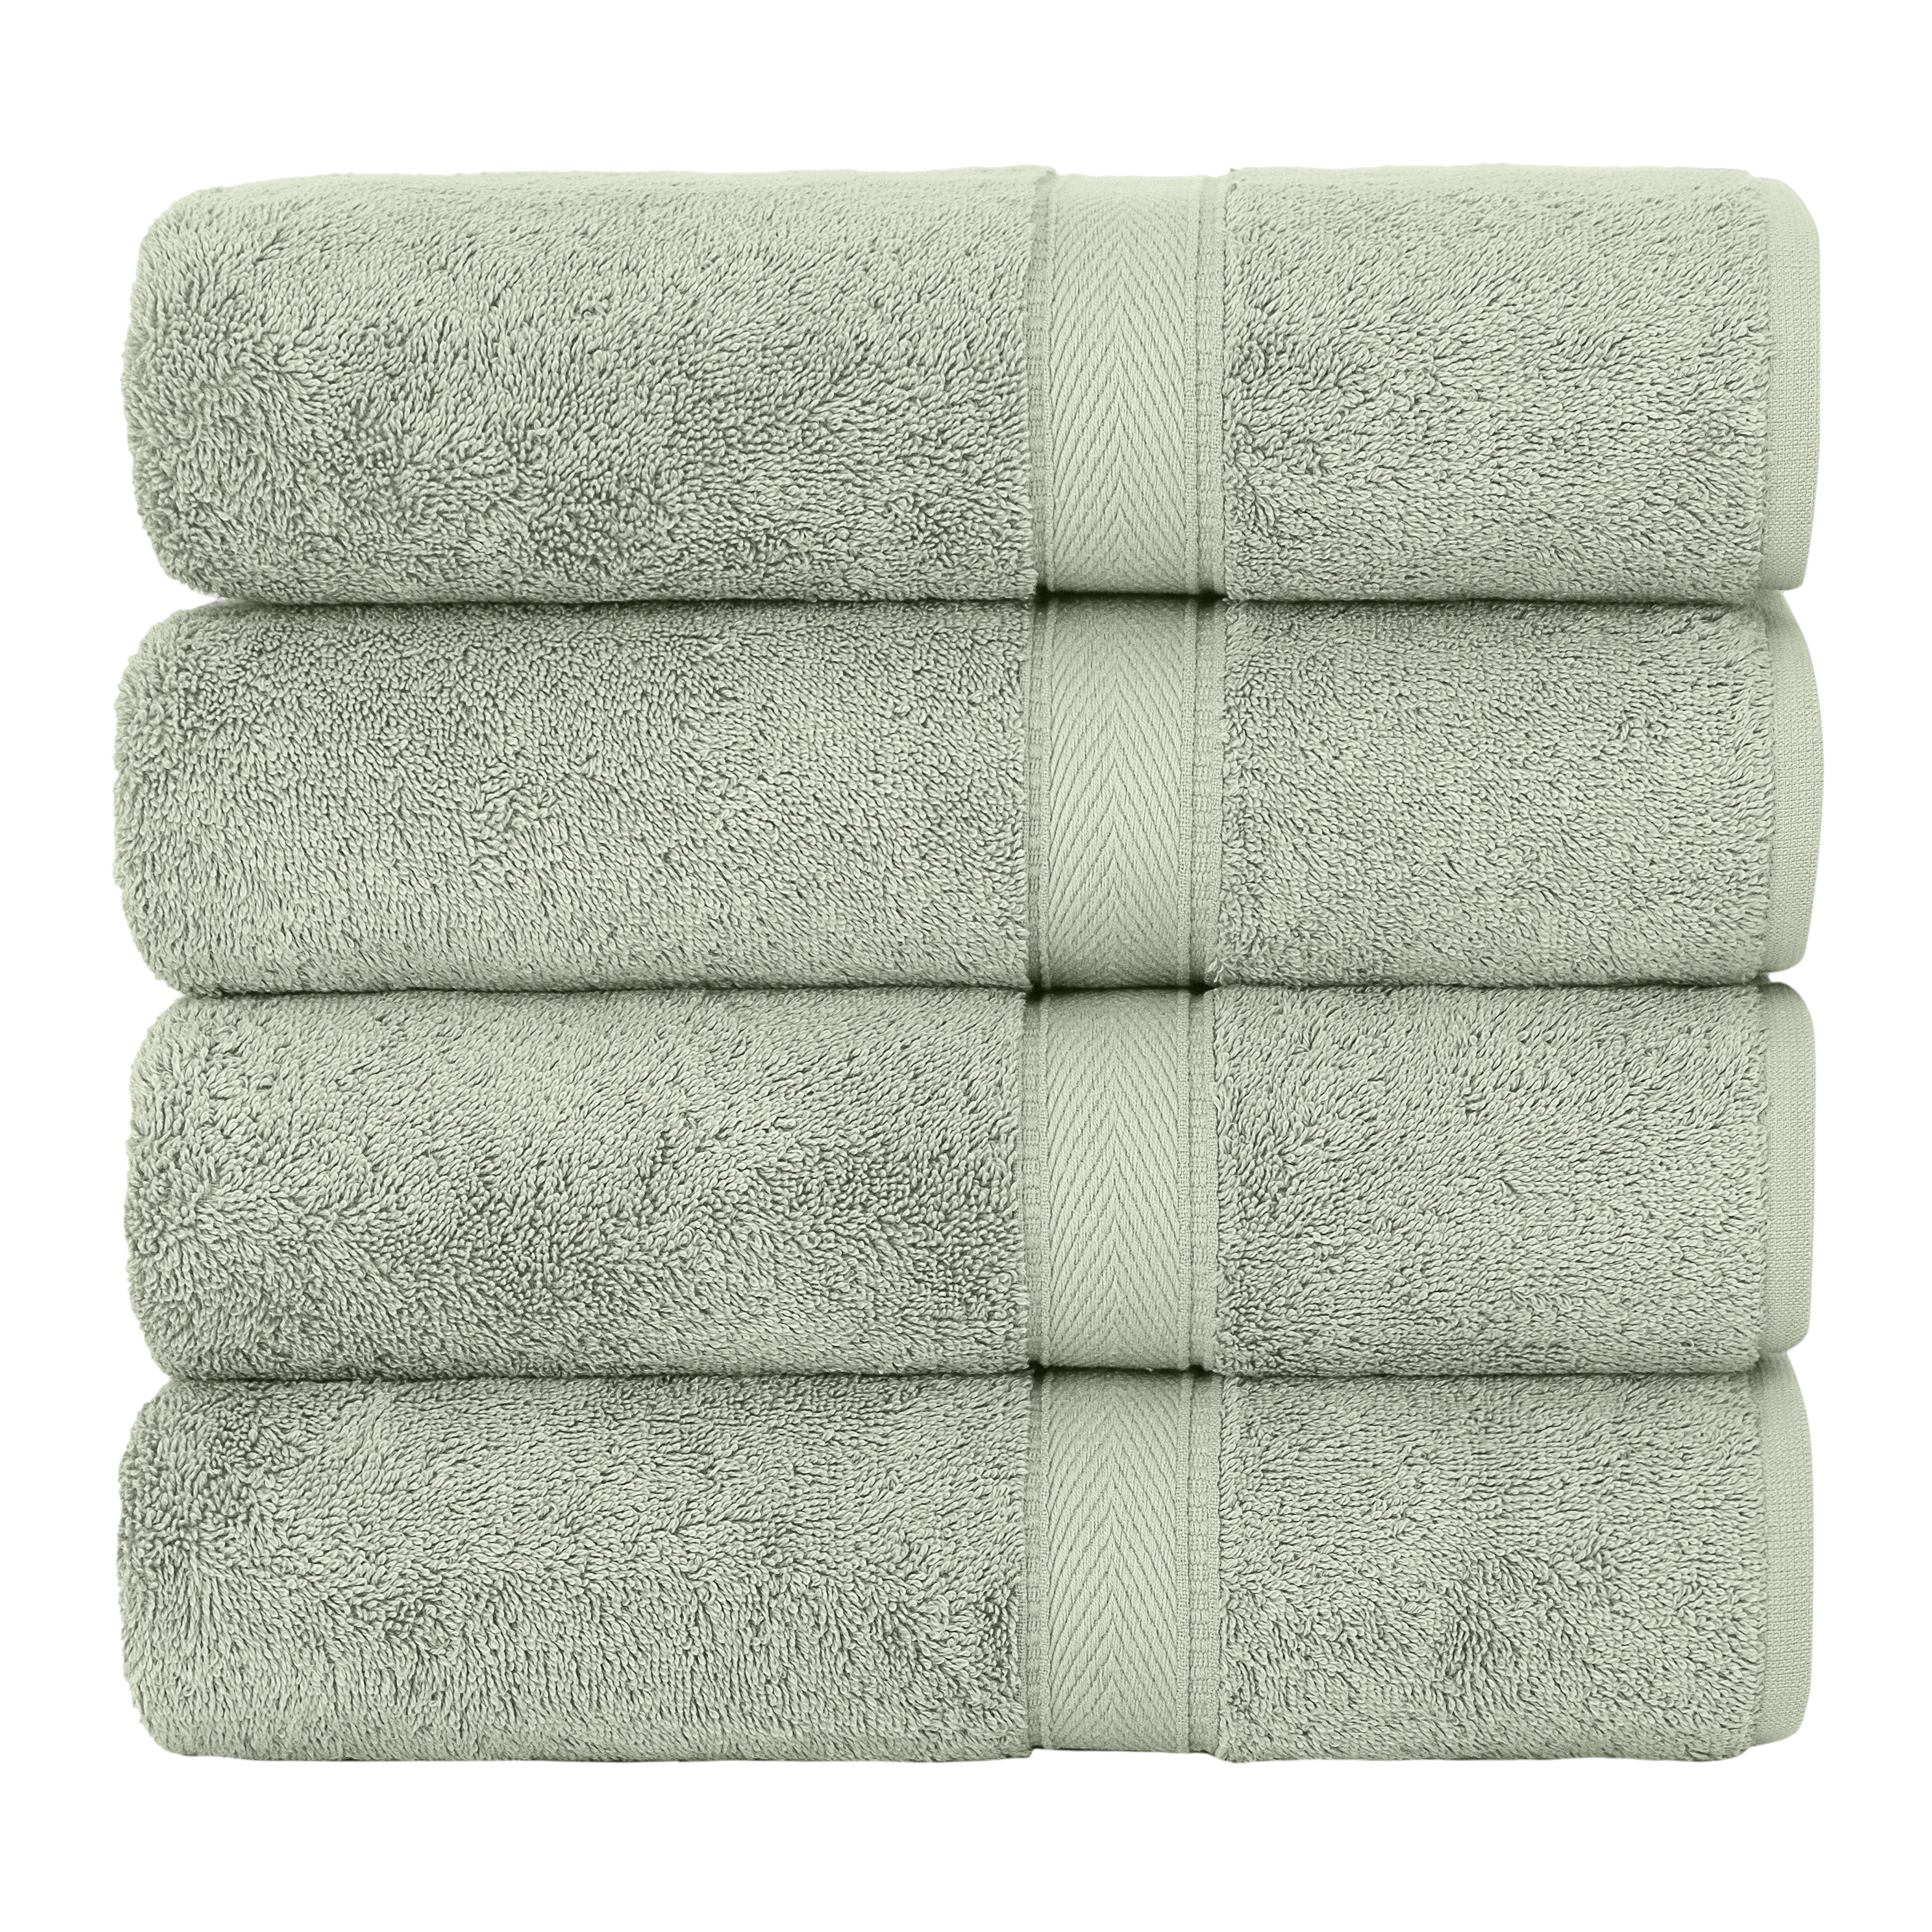  Bare Cotton Luxury Hotel and Spa Bath Towels, Striped, White,  Set of 4 : Home & Kitchen